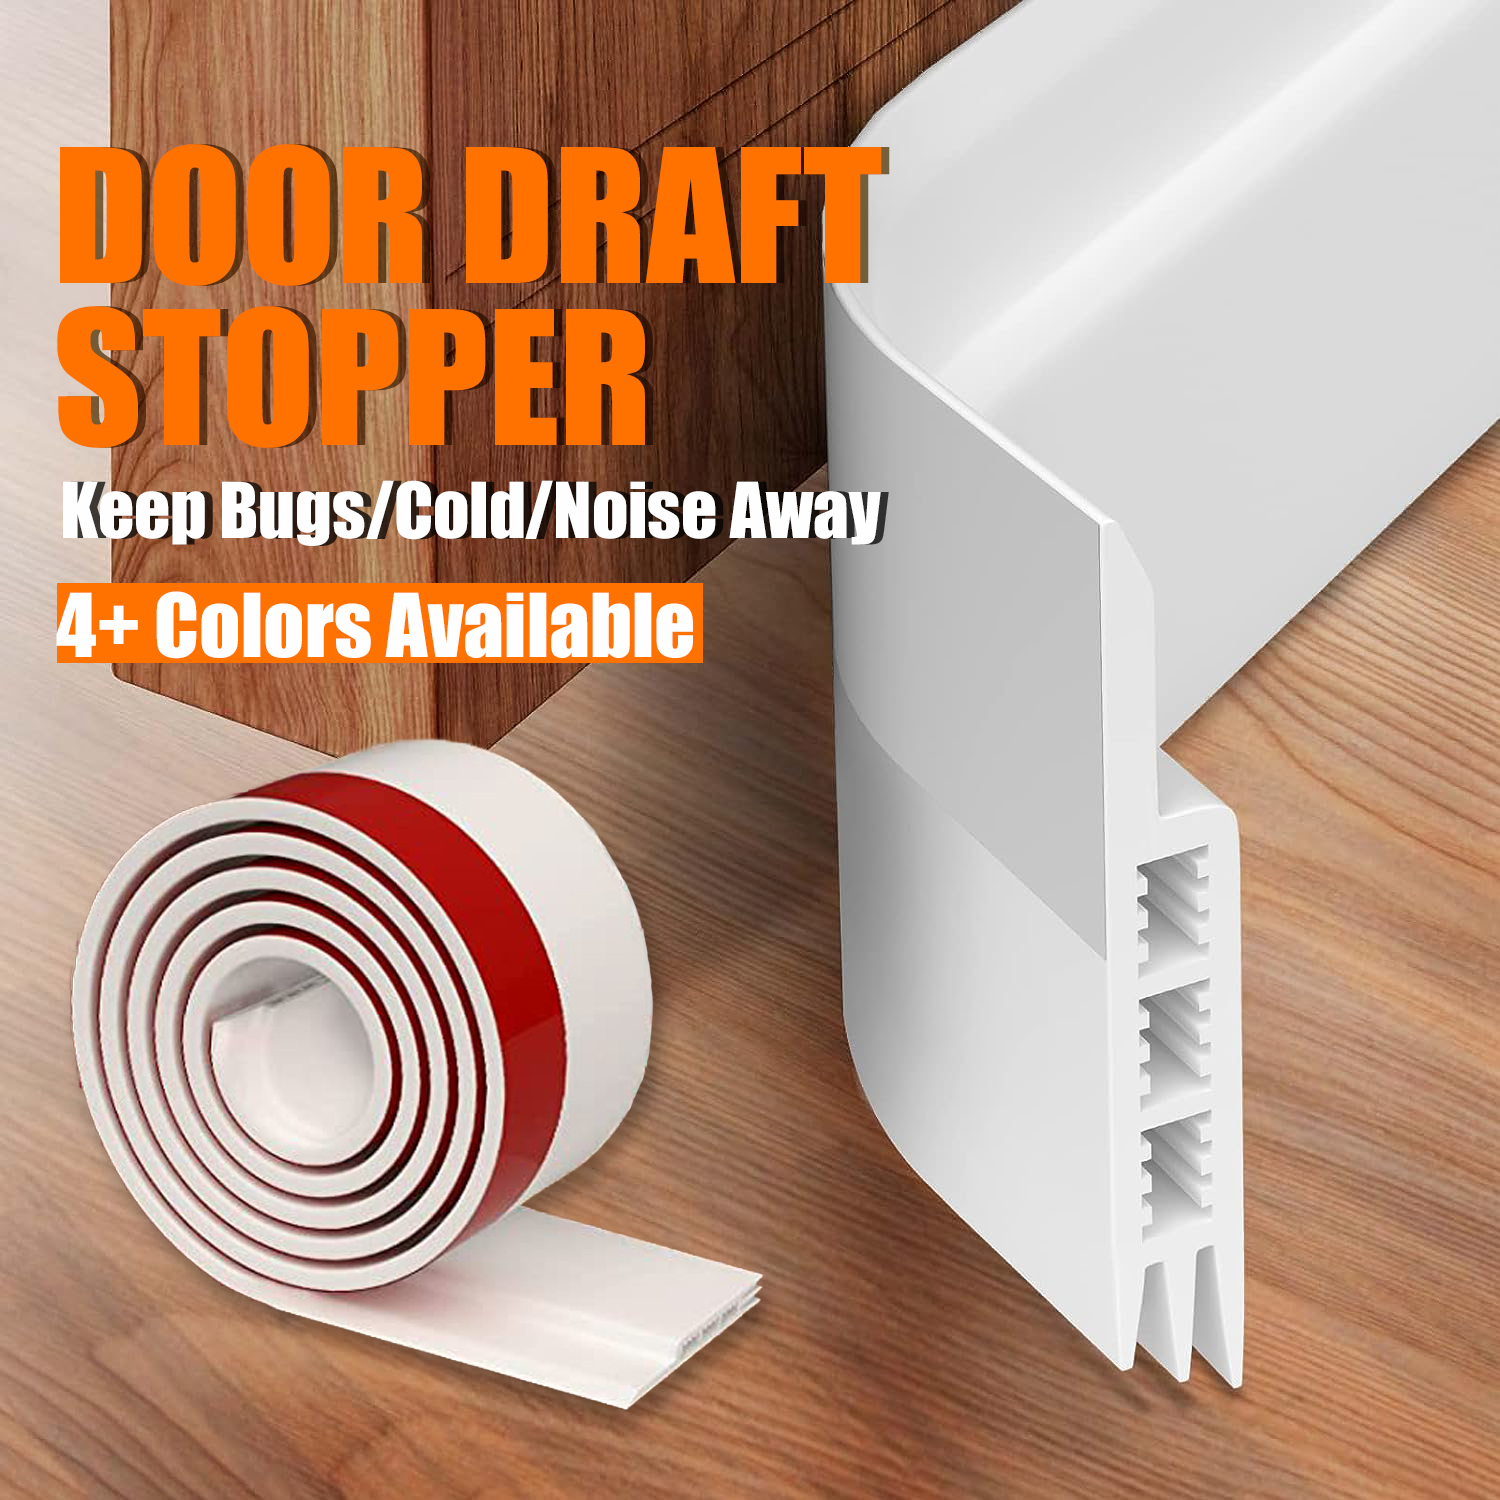 Door Draft Stopper, Draft Stopper for Bottom of Door Dual Draught Excluder  Air Insulator,Adjustable Size,Dust-Proof, Draft-Proof